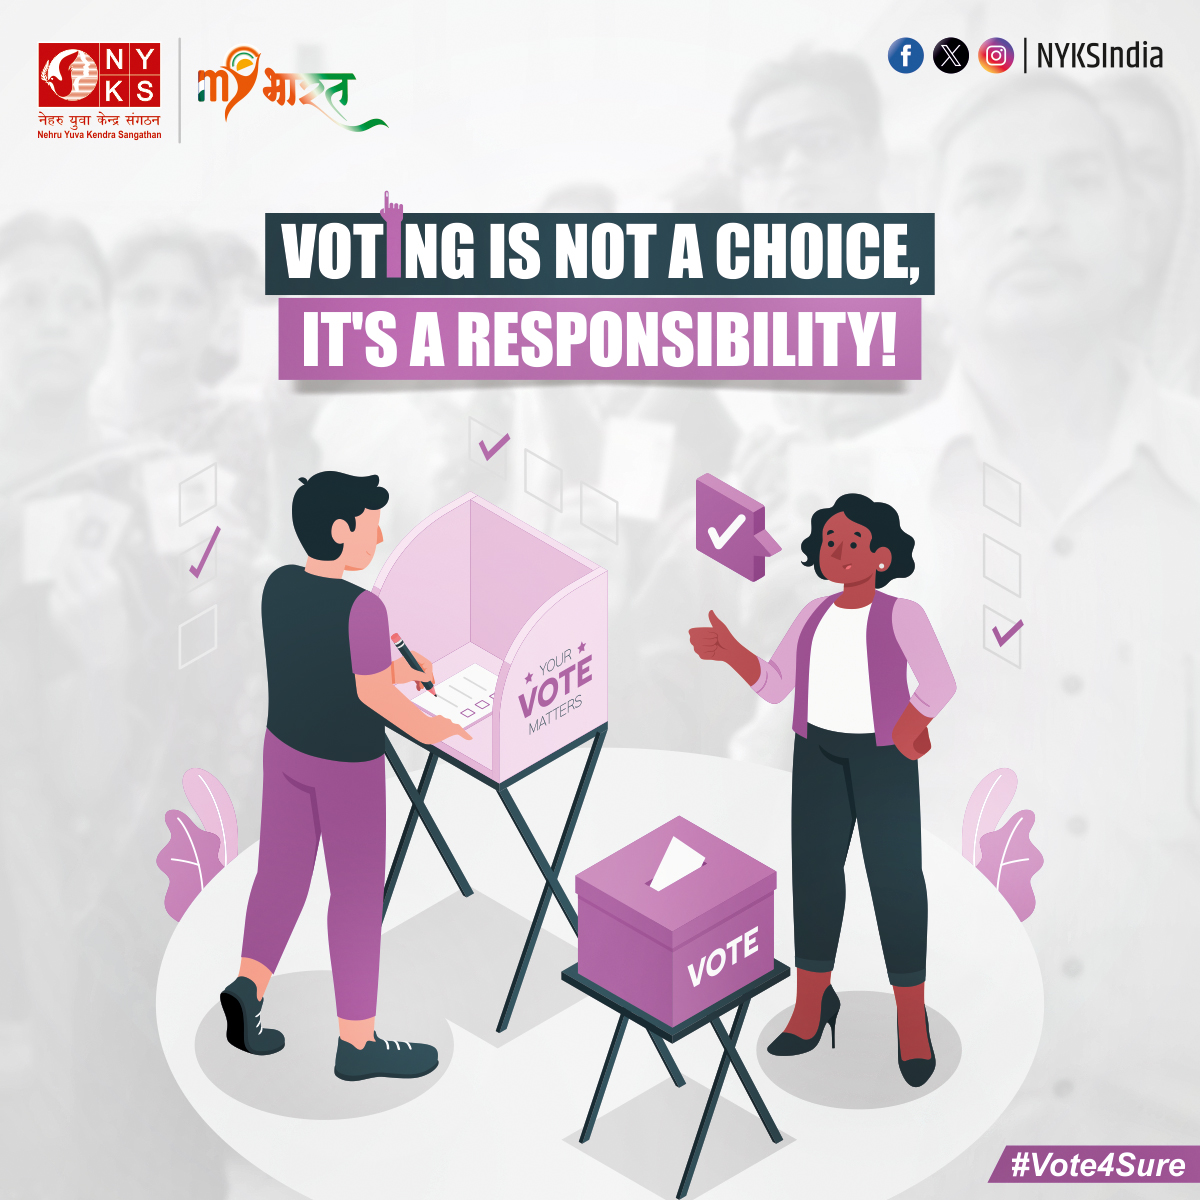 Your voice matters. Exercise your right, and fulfil your duty. Voting isn't just a choice, it's a responsibility. #MYBharatMYVote #Vote4Sure #VotingMatters #NYKS